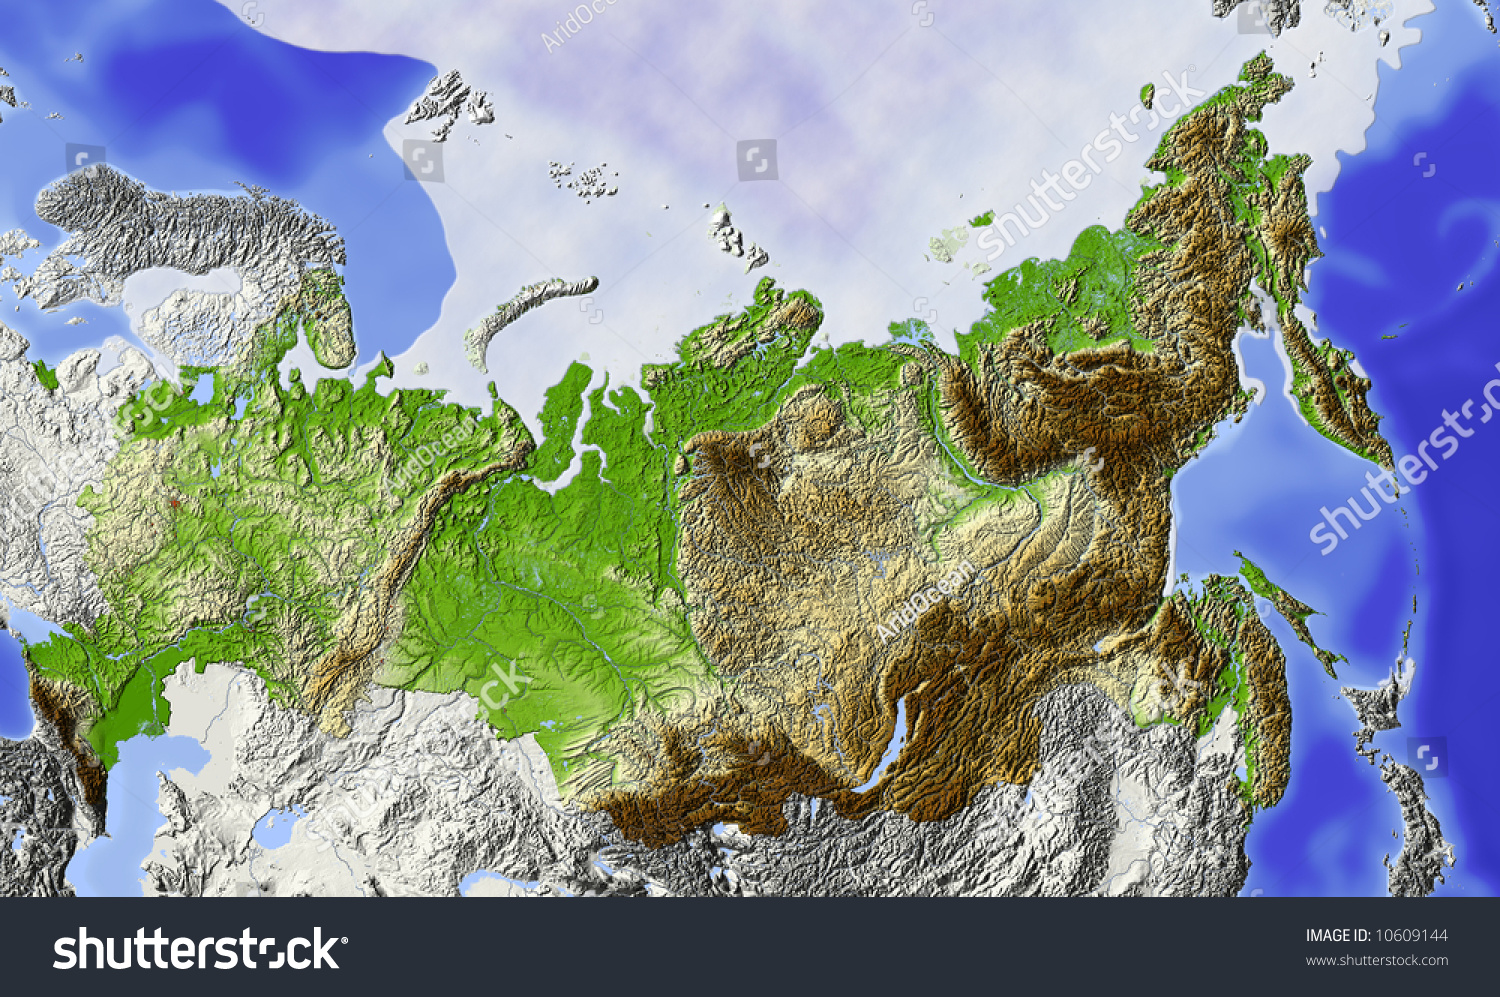 Russia. Shaded Relief Map Of Russian Federation, With Rivers, Major